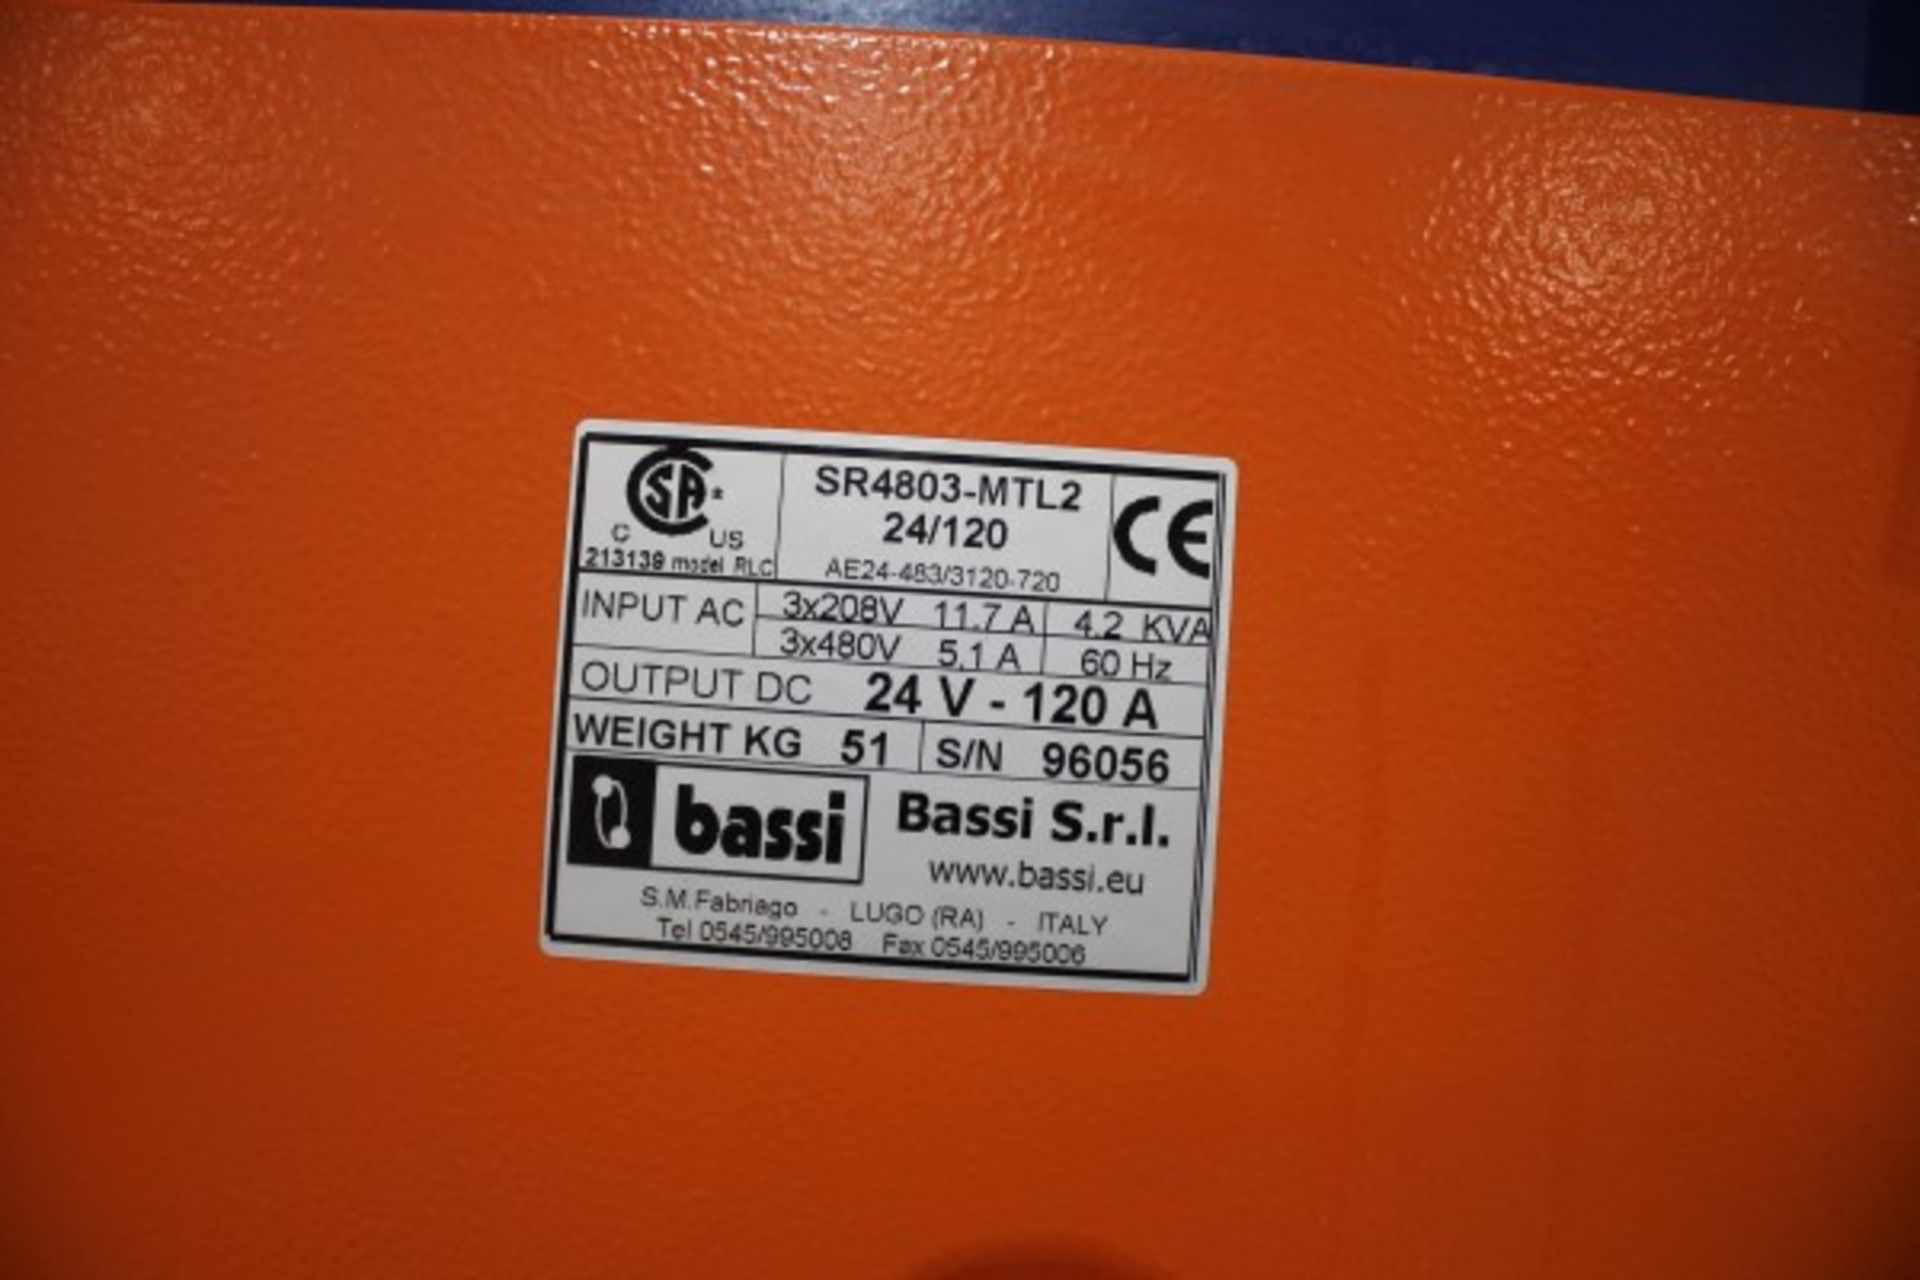 Bassi 24 Volt Battery Charger, M# RLC, S/N 96056, 120 Amp | Loading Fee: $5 - Image 2 of 2